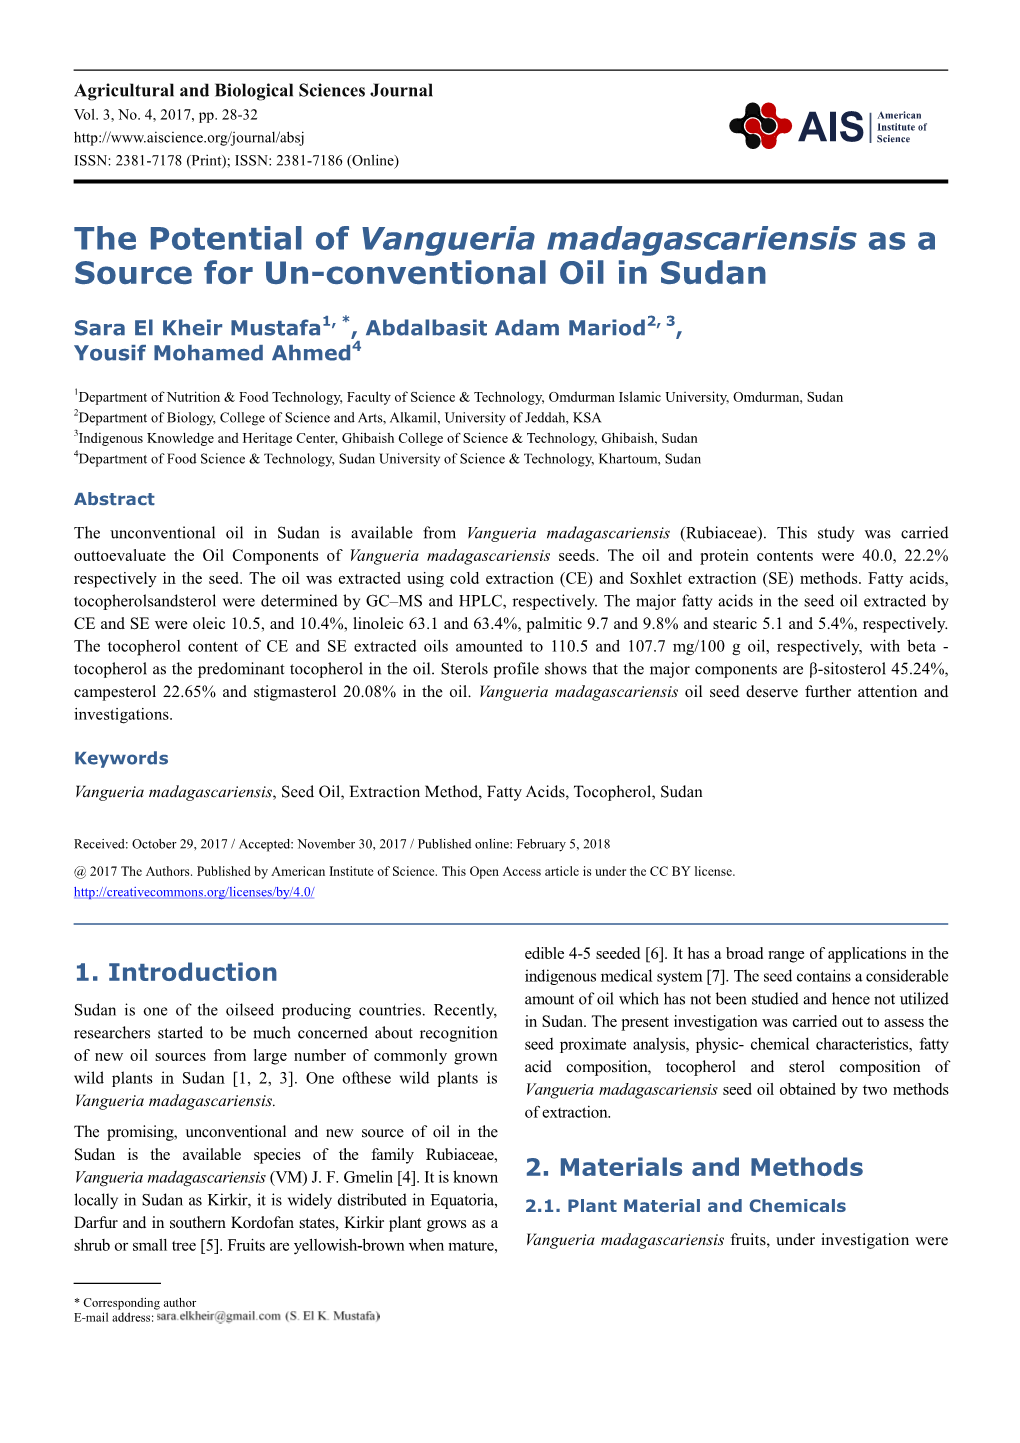 The Potential of Vangueria Madagascariensis As a Source for Un-Conventional Oil in Sudan